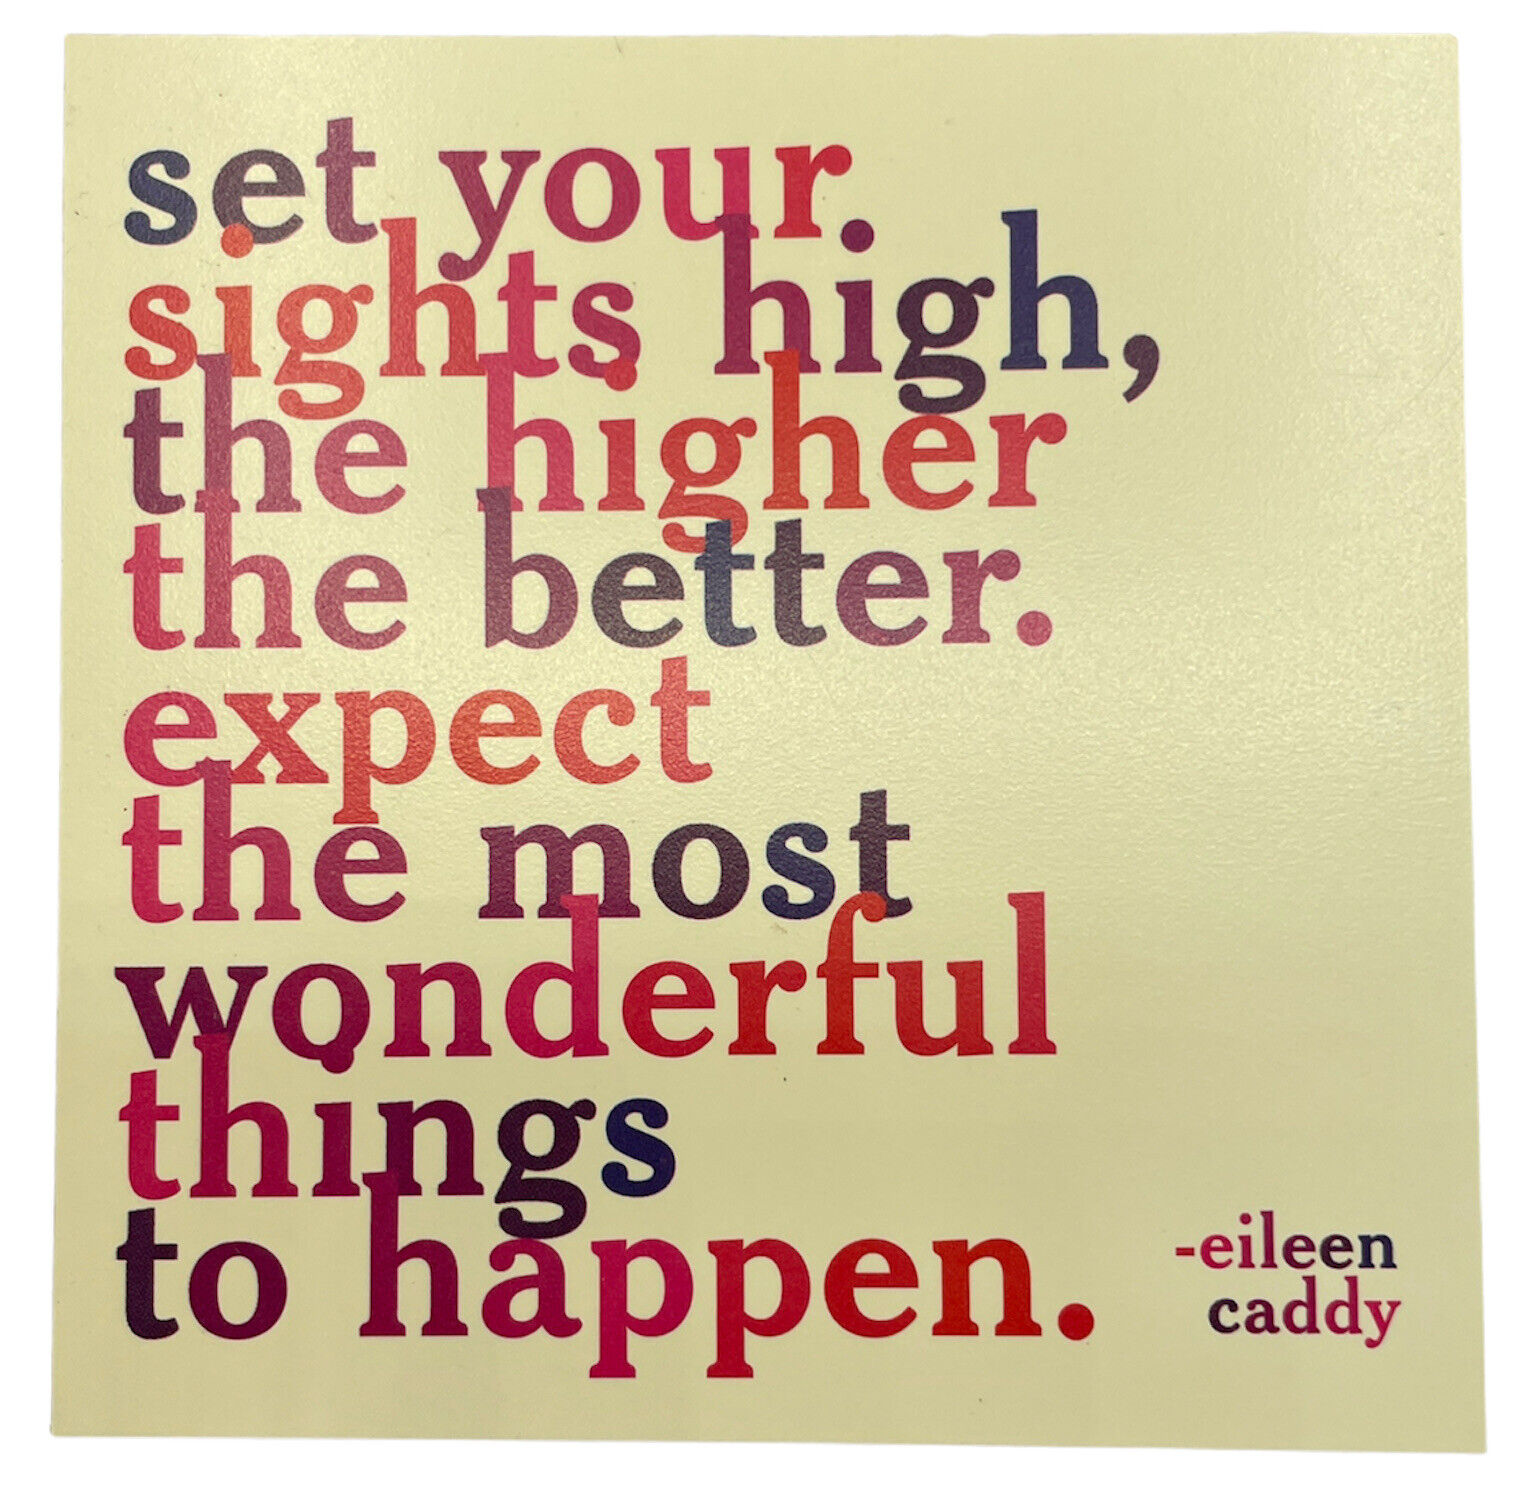 Quotable Magnets Set Your Sights High, The Higher The Better. Expect The Most.